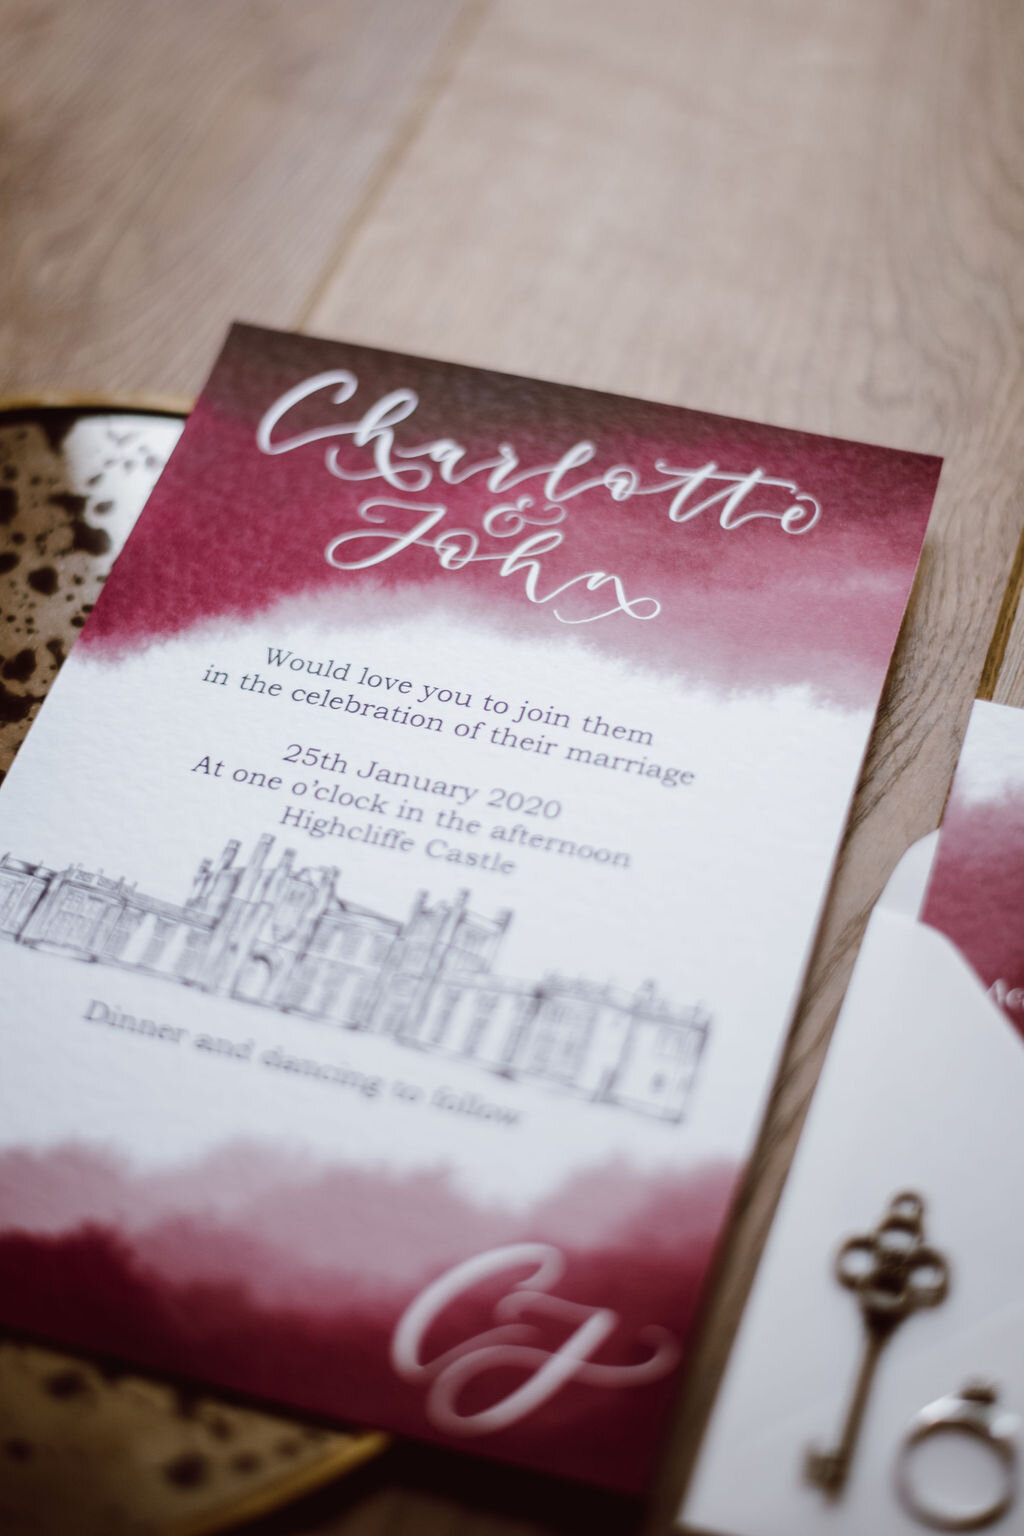 Burgundy watercolour and Highcliff castle illustration wedding wedding invitation - venue drawing and calligraphy.jpg